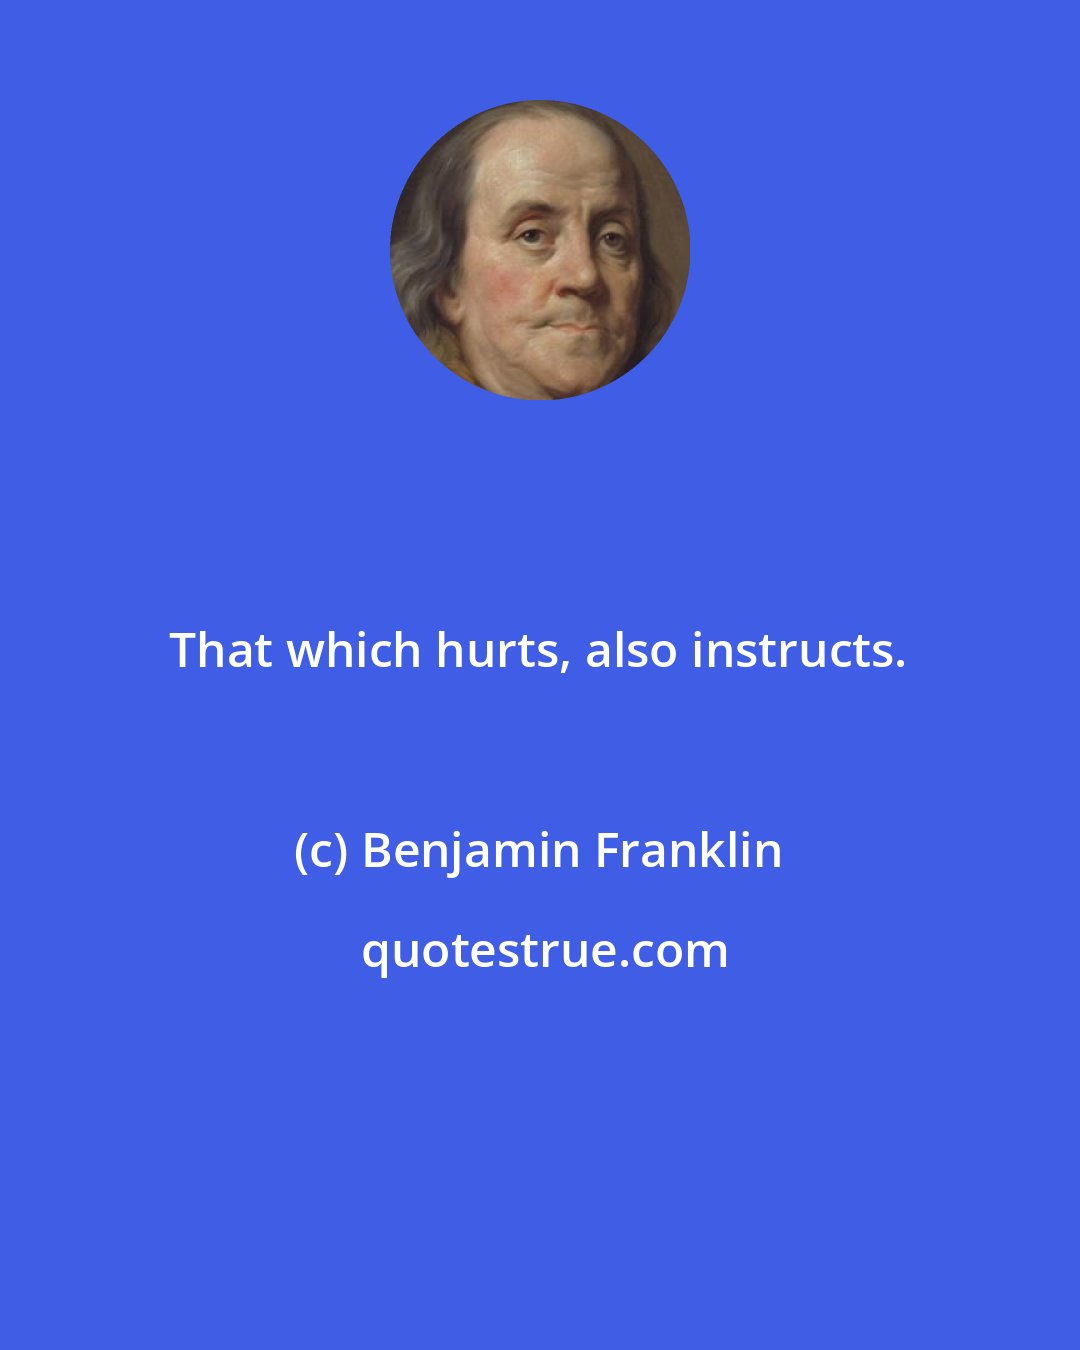 Benjamin Franklin: That which hurts, also instructs.